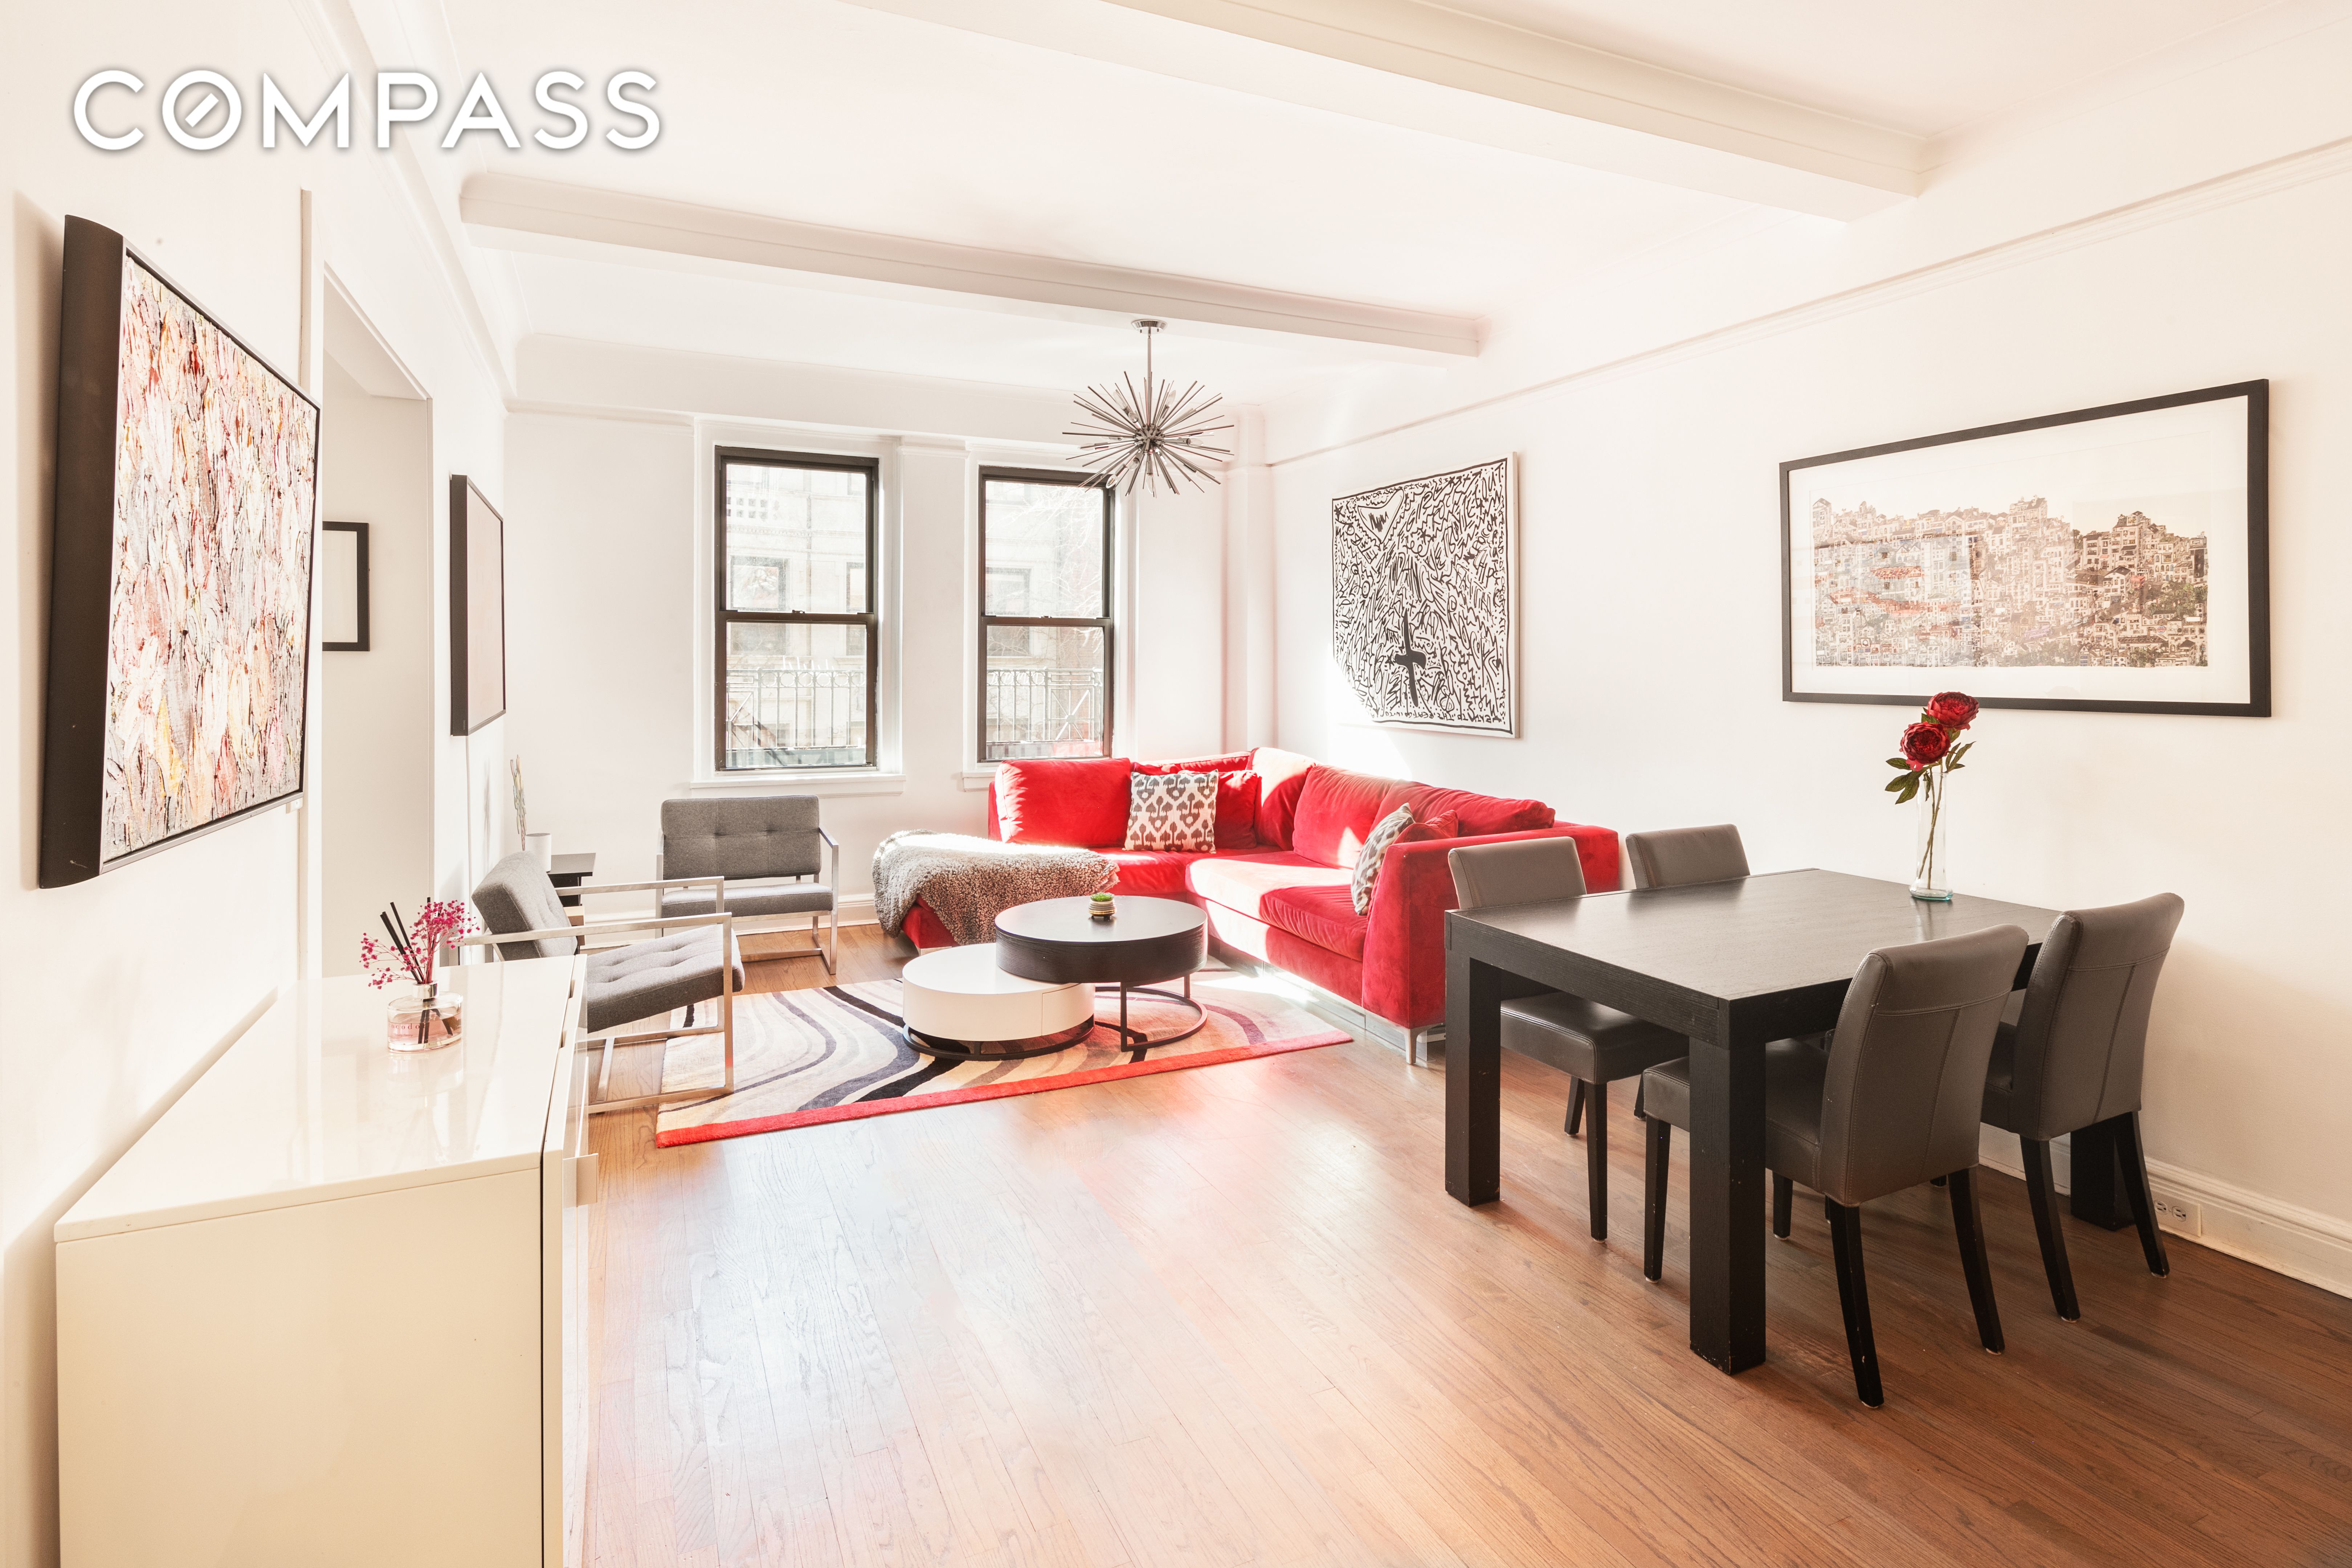 151 West 74th Street 4A, Upper West Side, Upper West Side, NYC - 3 Bedrooms  
2 Bathrooms  
6 Rooms - 